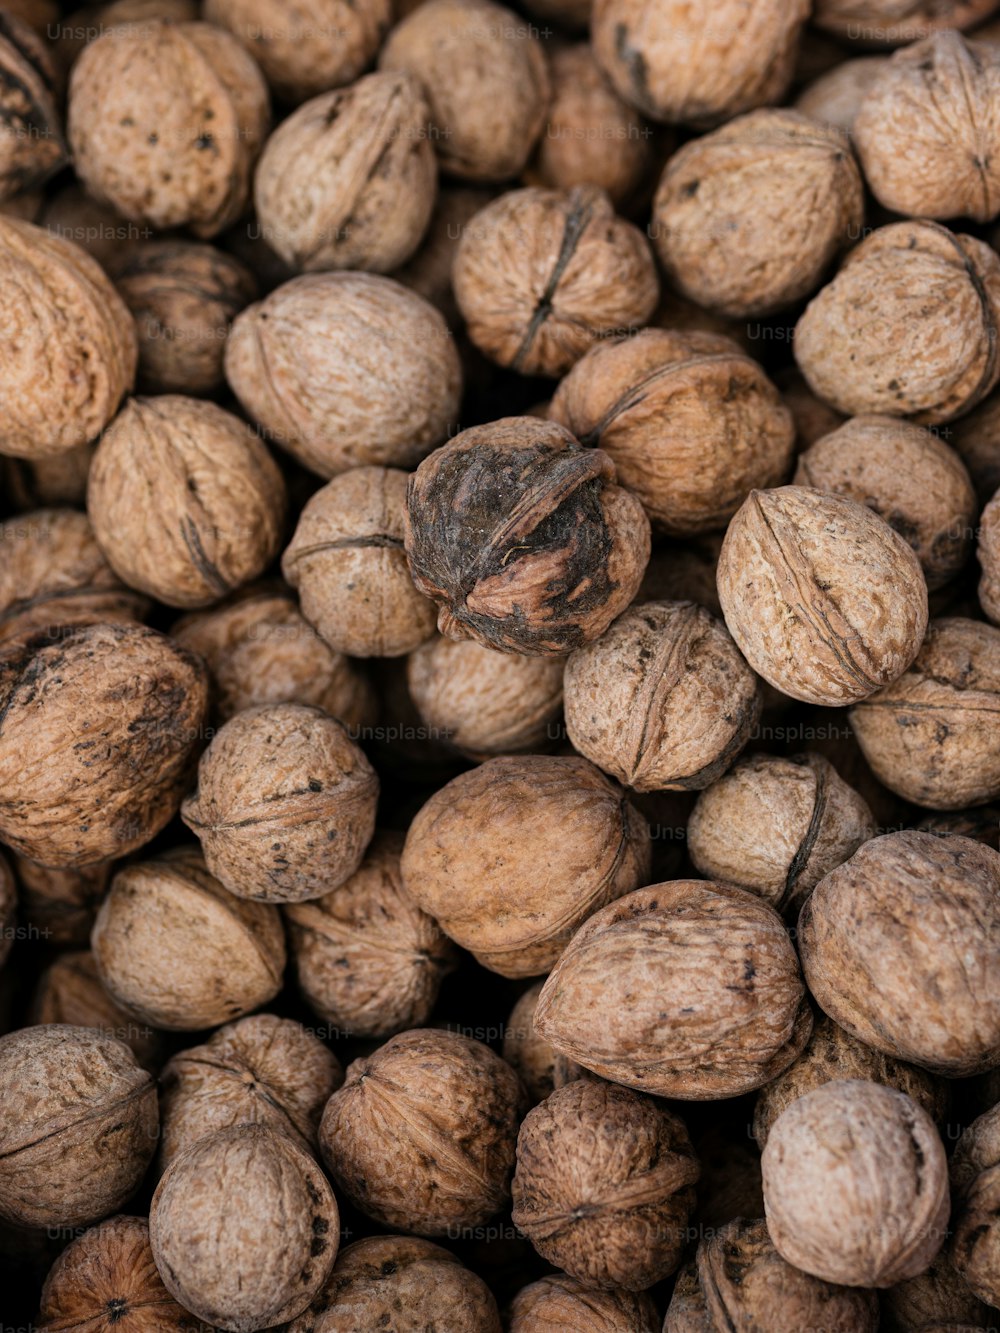 a pile of walnuts that are brown in color